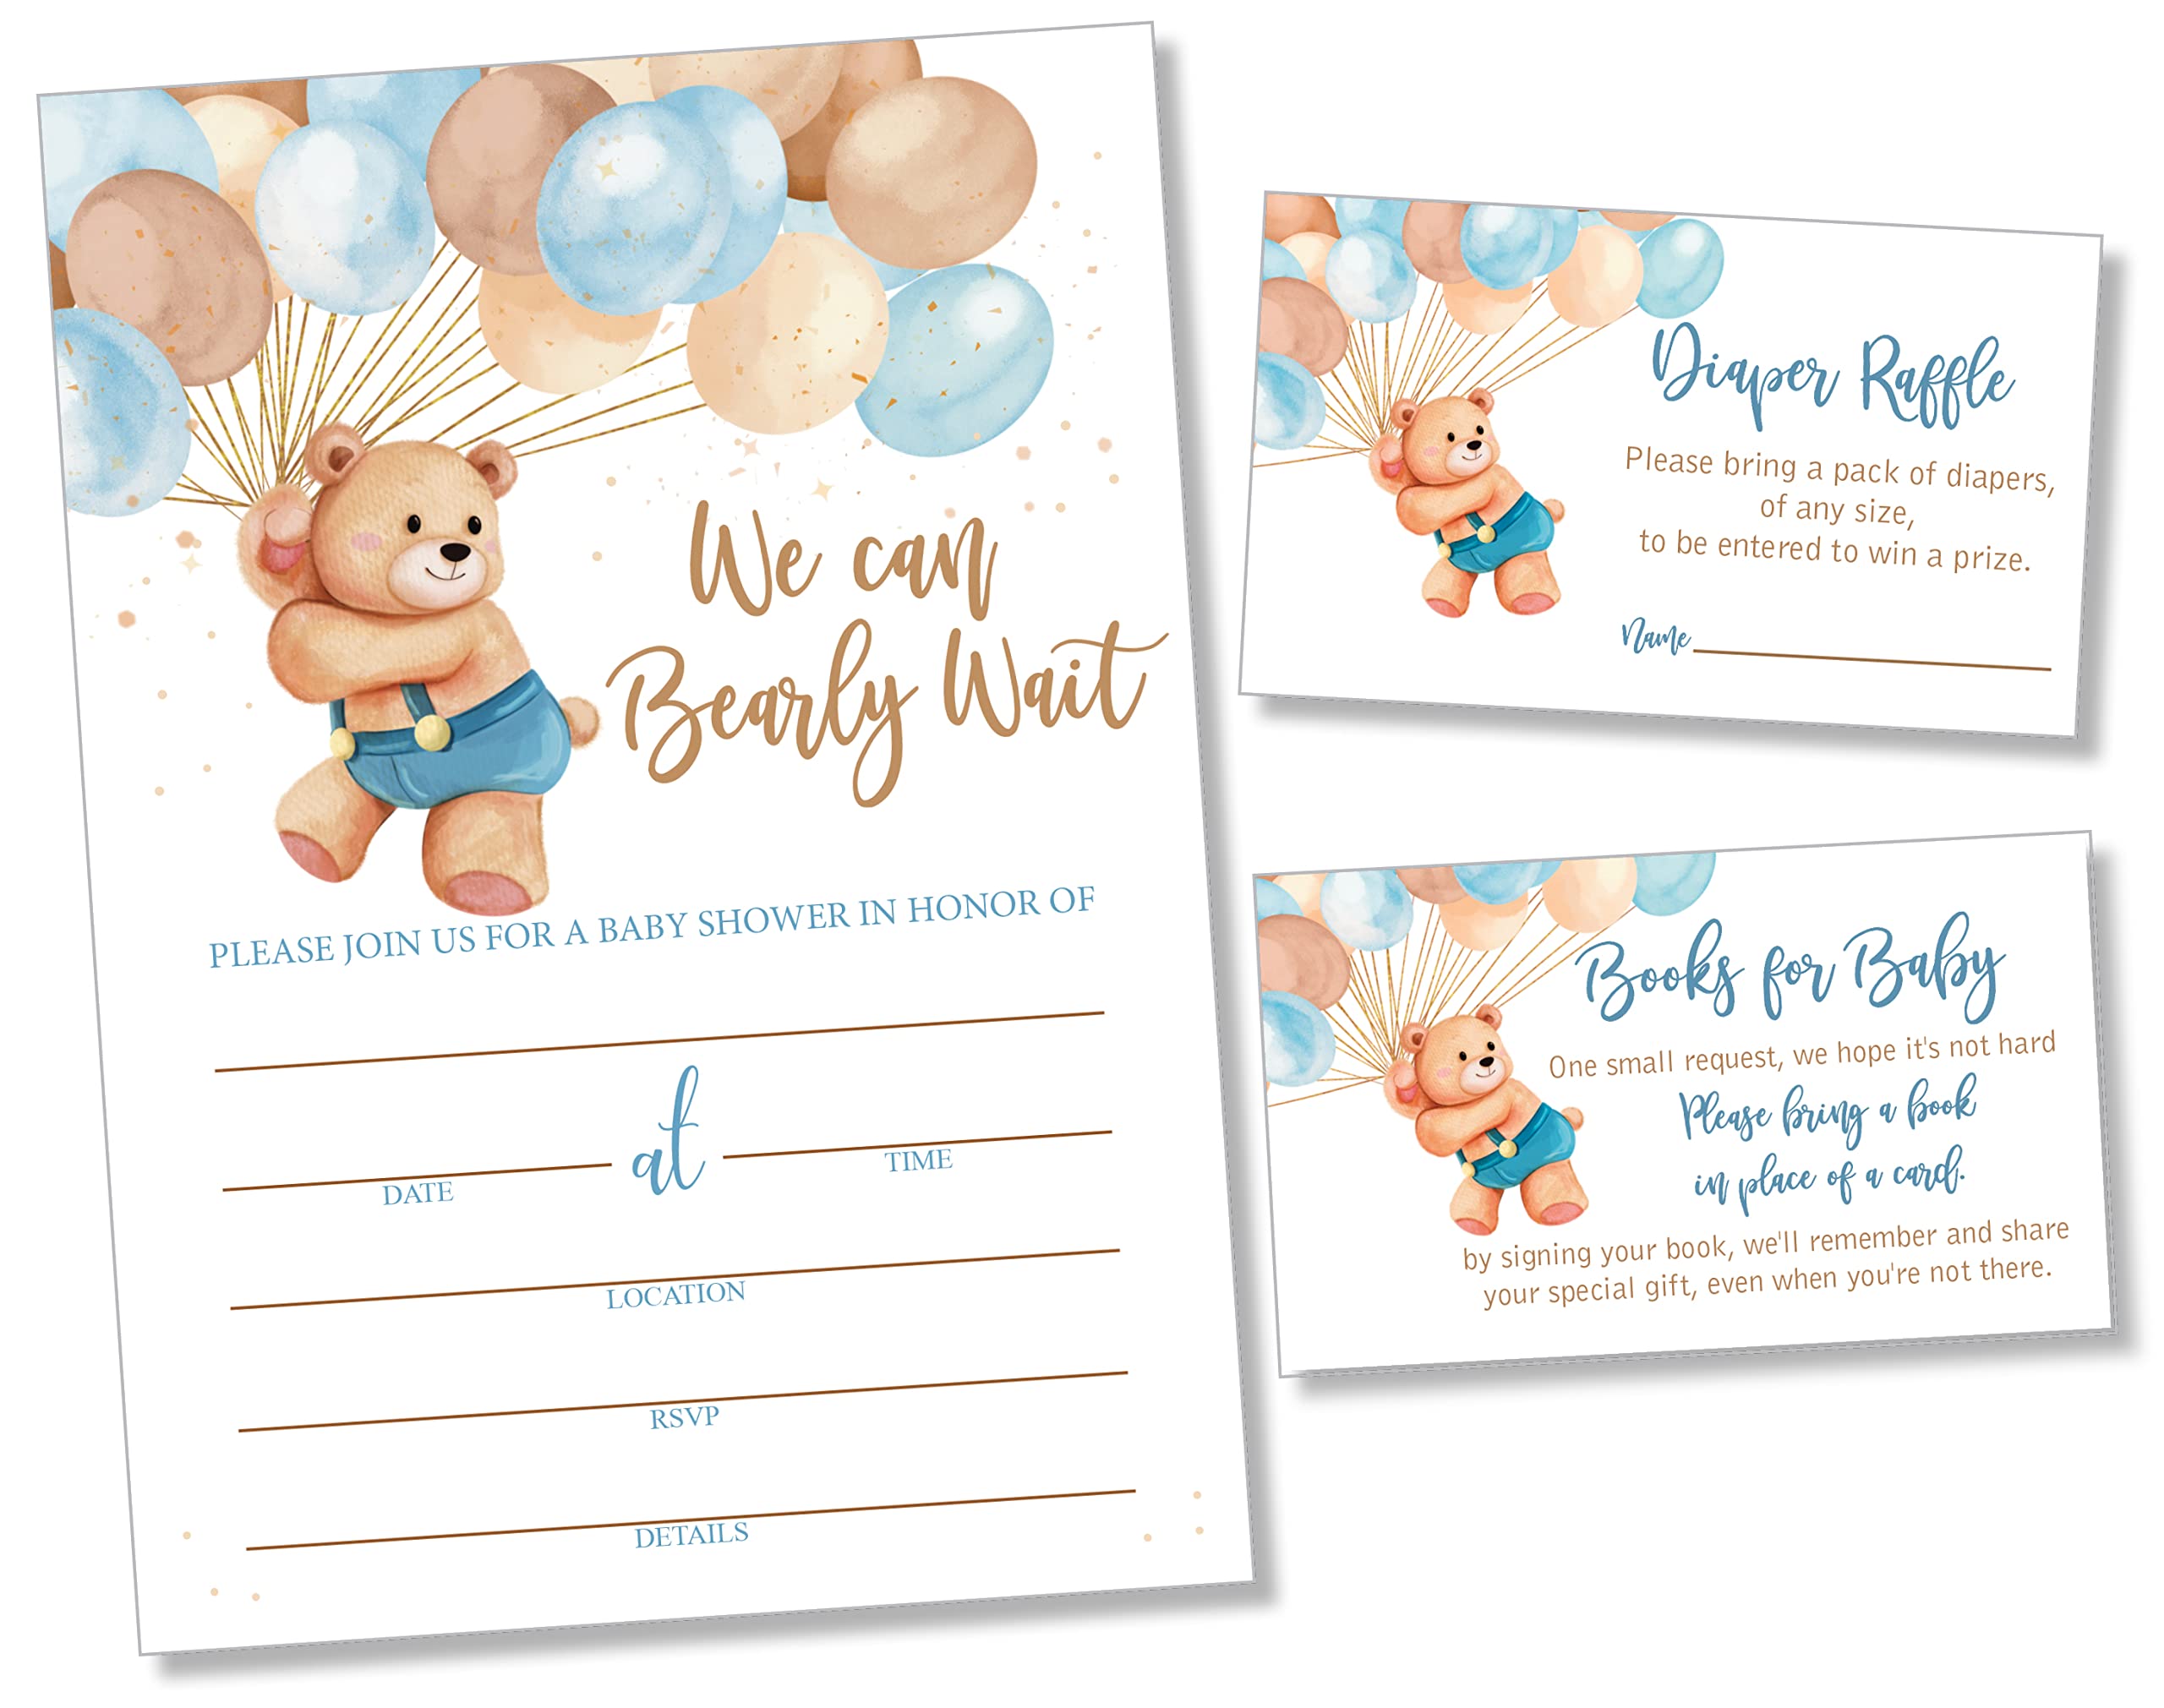 25 Teddy Bear Balloon Up Up and Away Can Bearly Wait Boy Baby Shower Invitations (Large Size 5X7 inches), Diaper Raffle Tickets, Book Request Cards with Envelopes and 50 Matching Thank You Cards Boxed